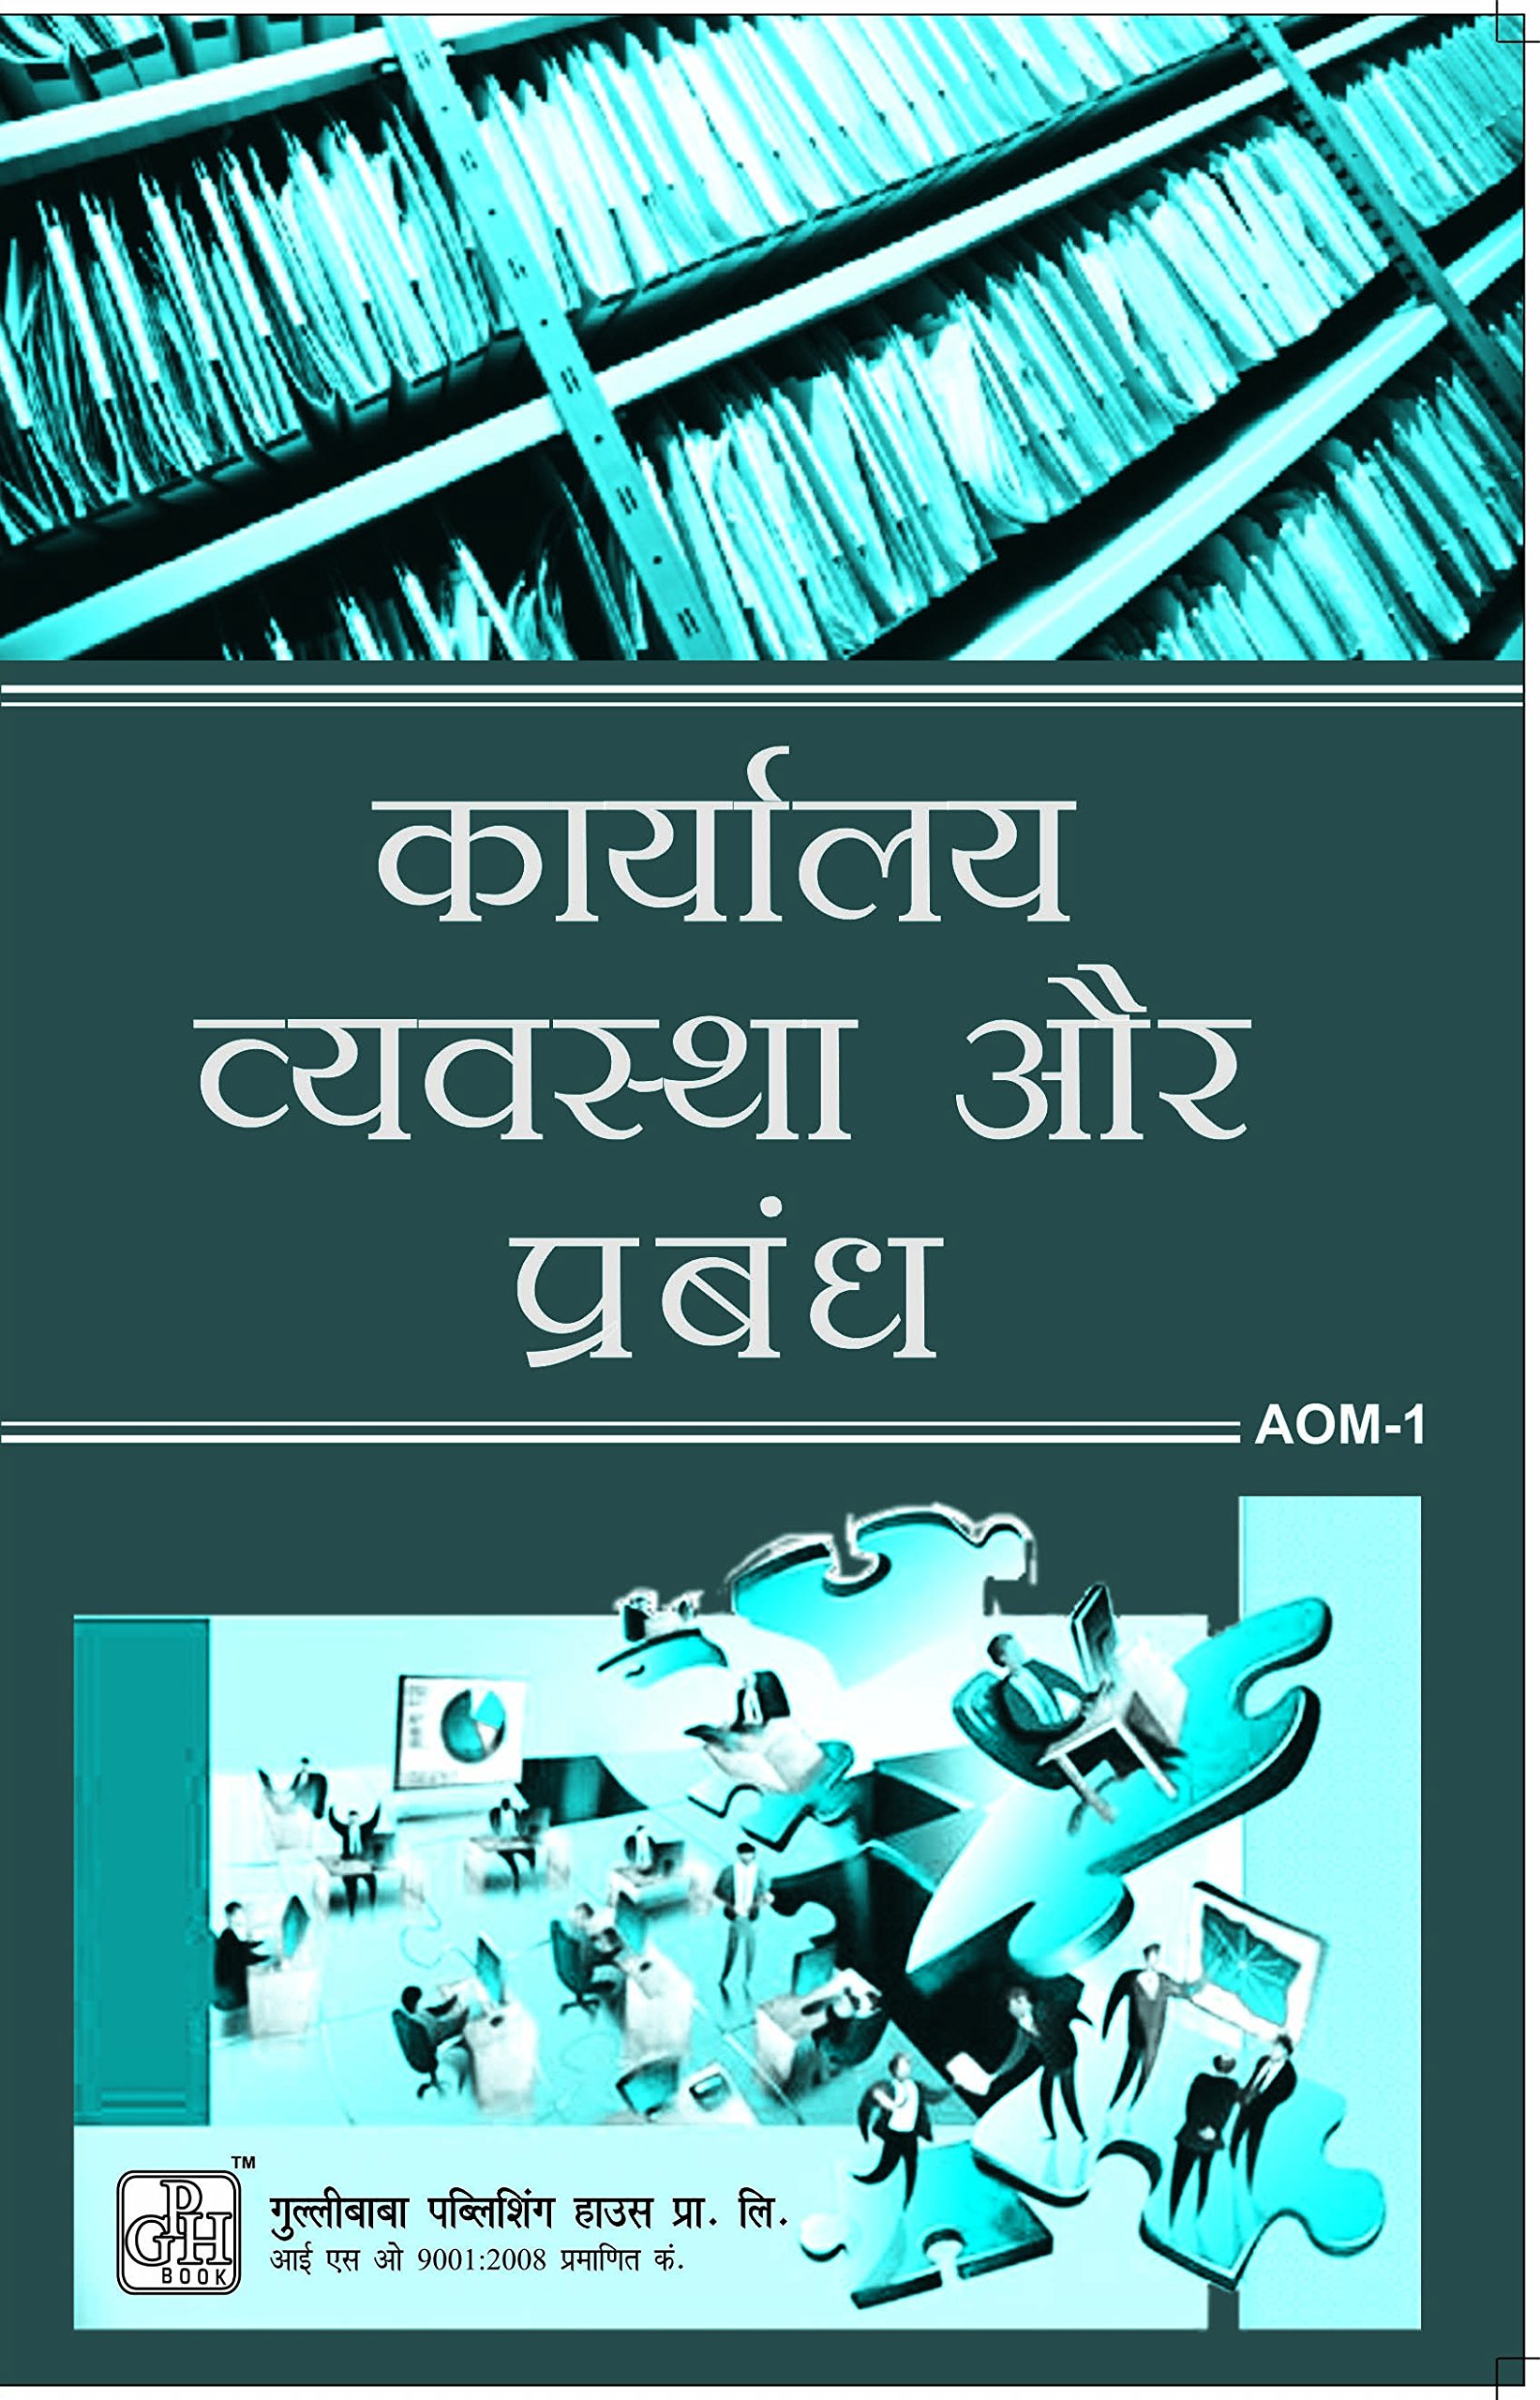 LATEST AOM1 Office Organization and Management IGNOU Help book